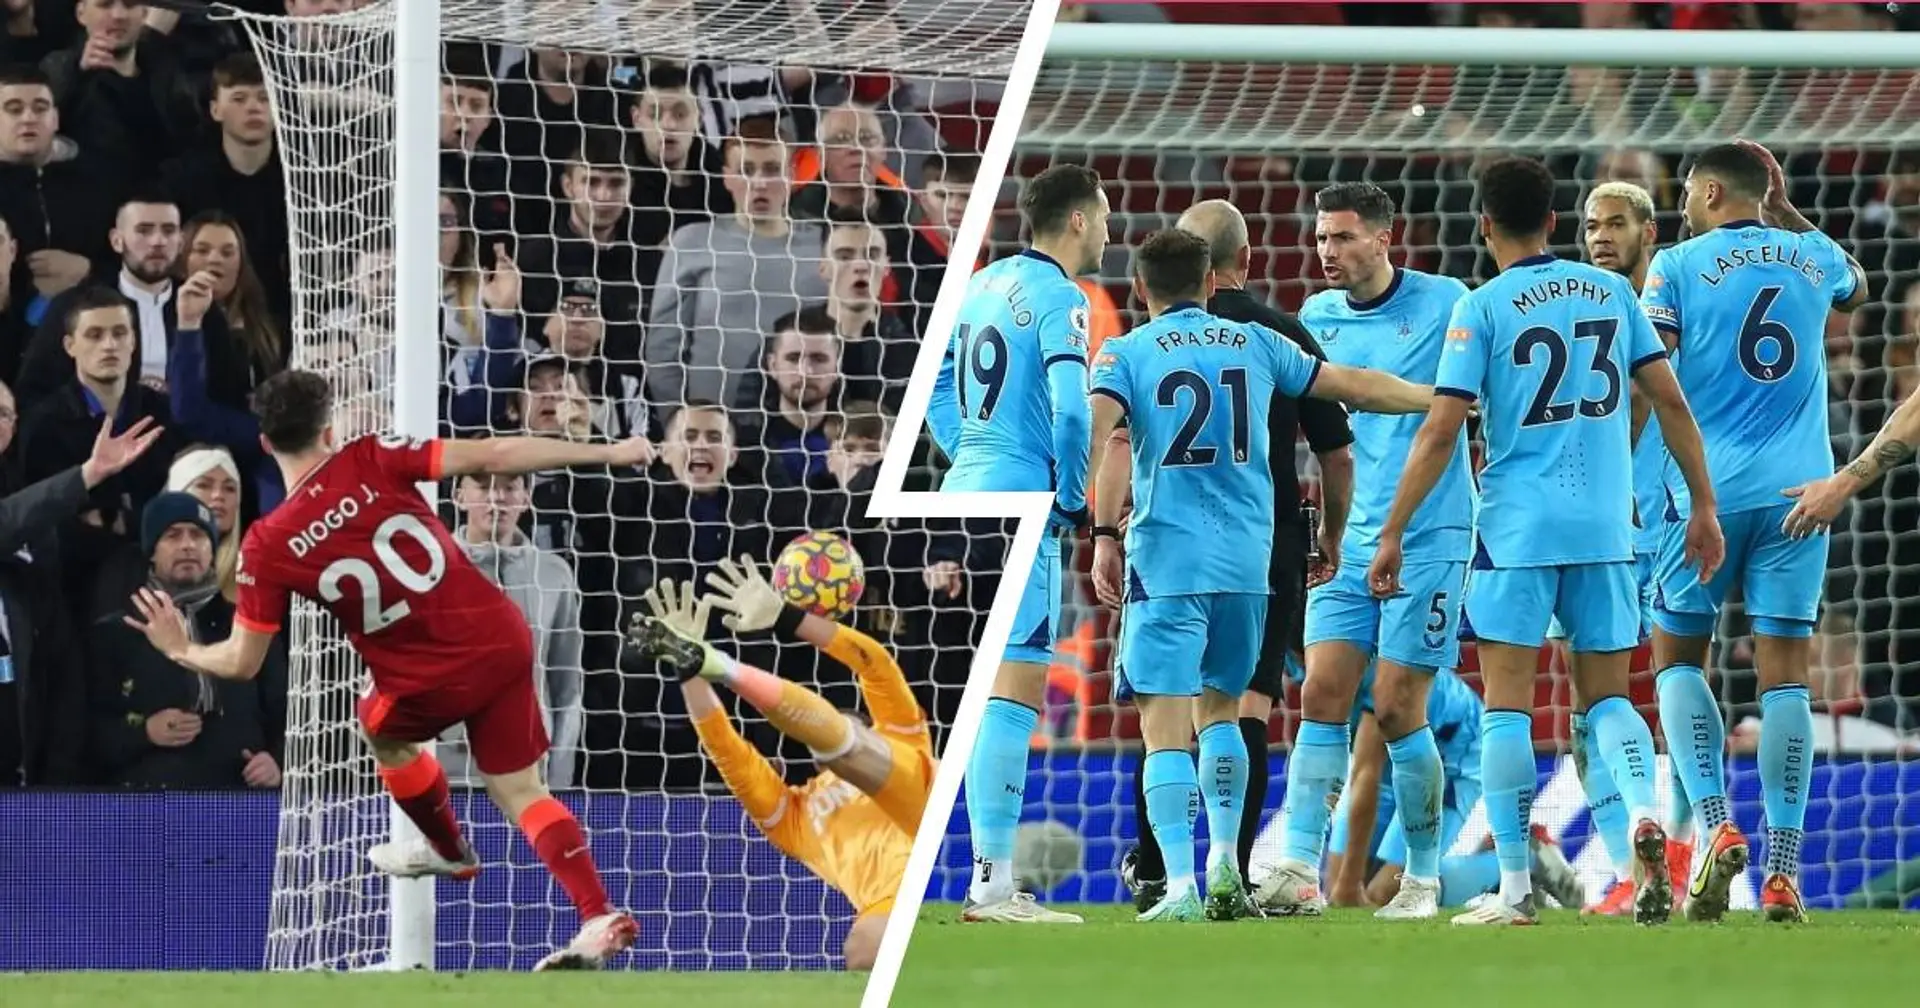 'The game should have been stopped': Newcastle boss Howe complains against 'unjust' Liverpool goal